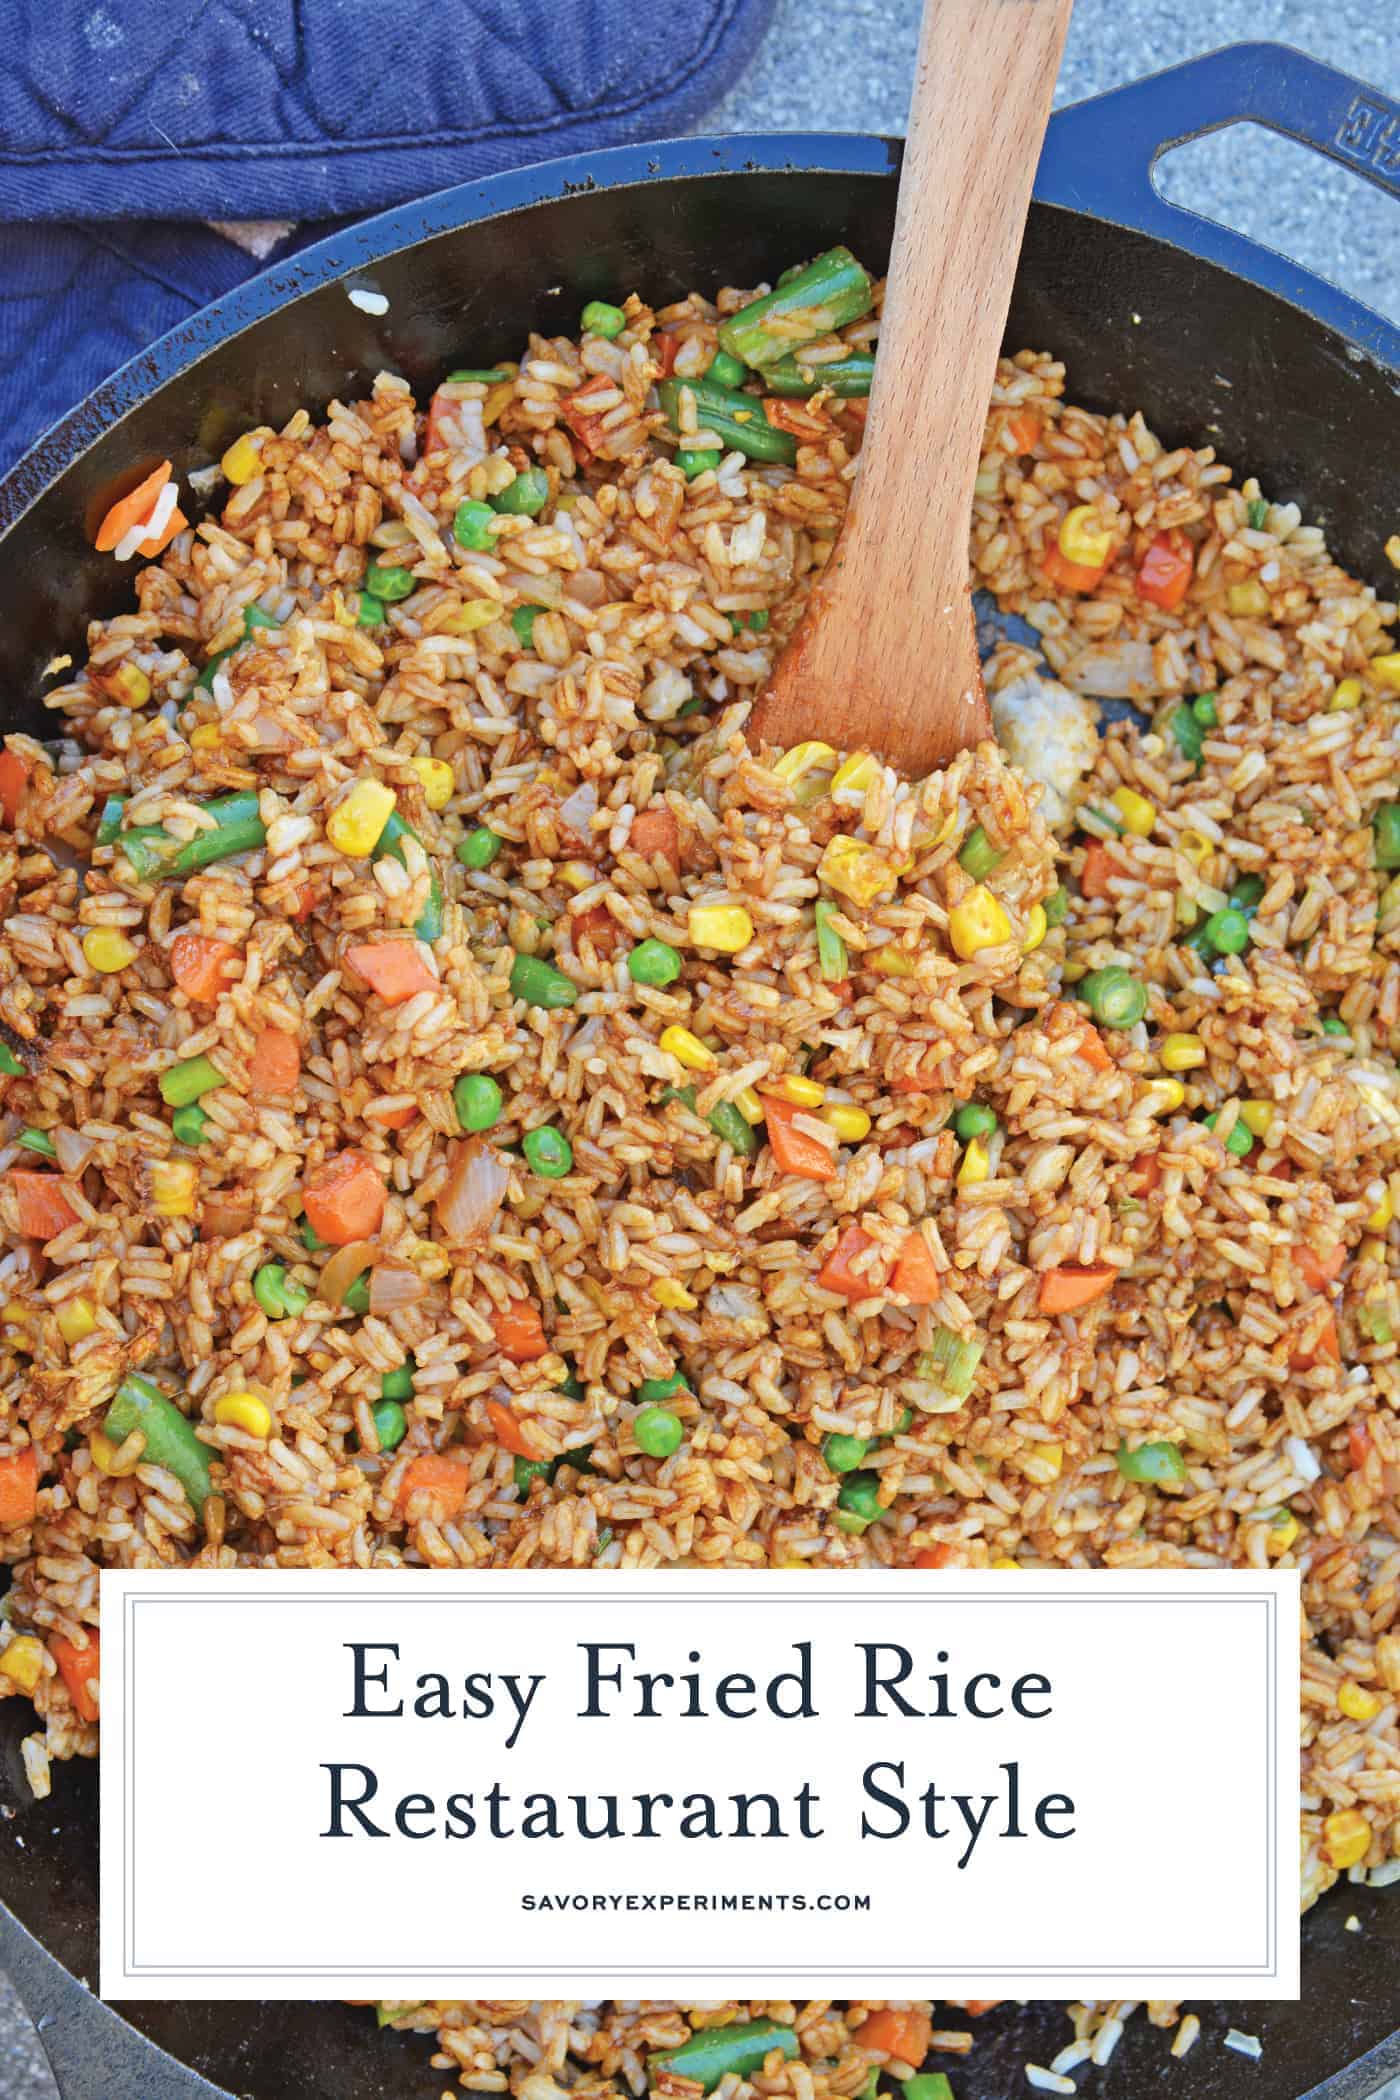 Easy Fried Rice + Video - Restaurant Style Fried Rice in Minutes!